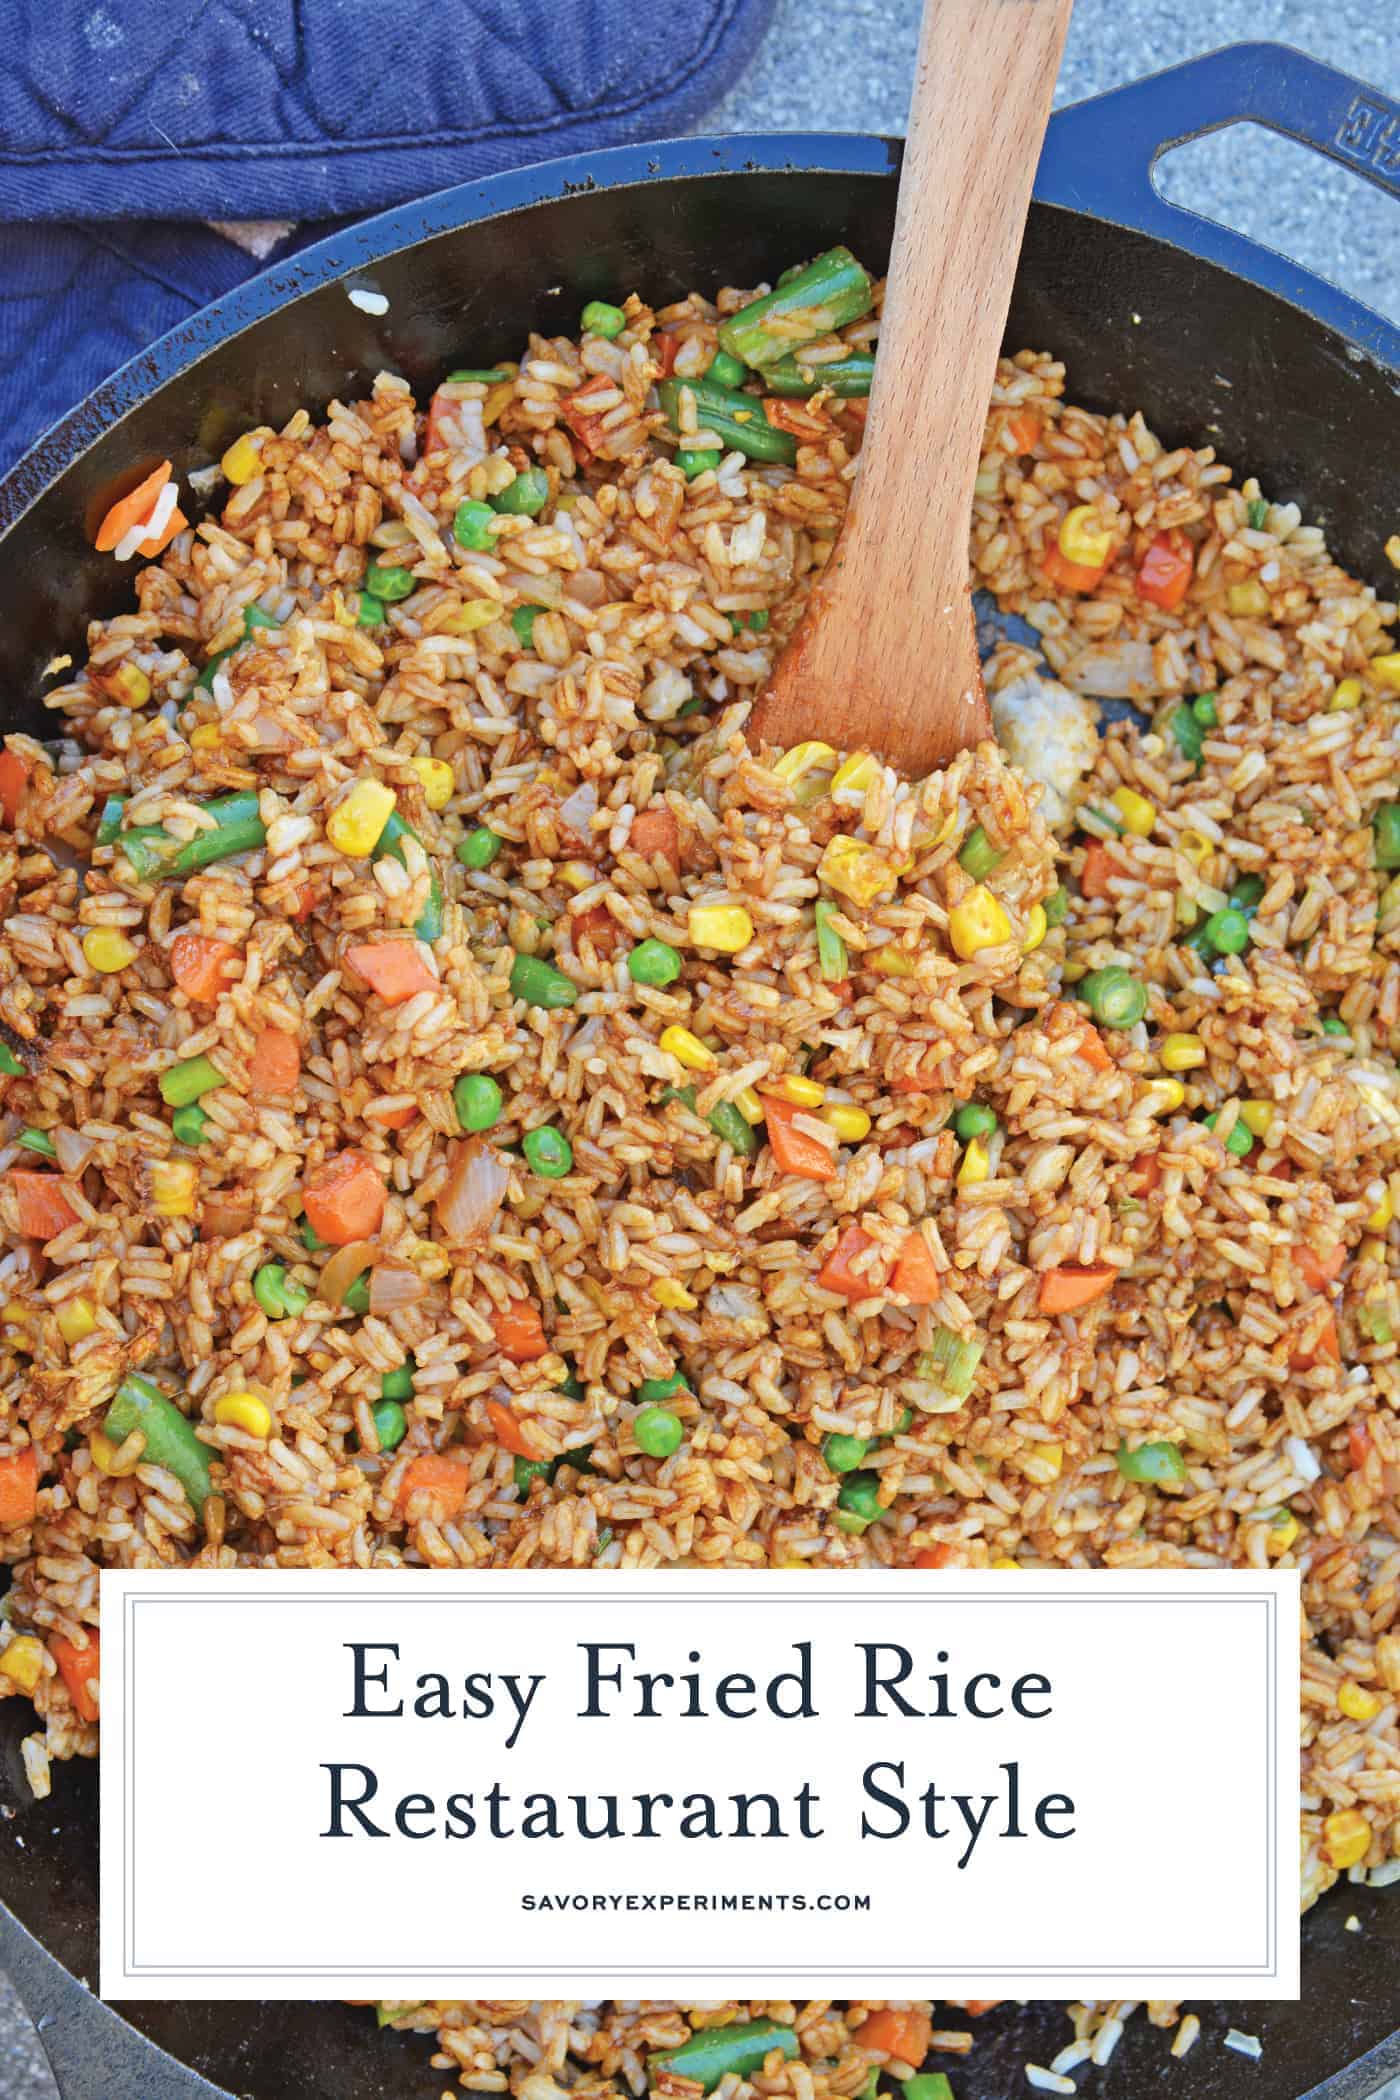 Easy Fried Rice + Video - Restaurant Style Fried Rice in Minutes!